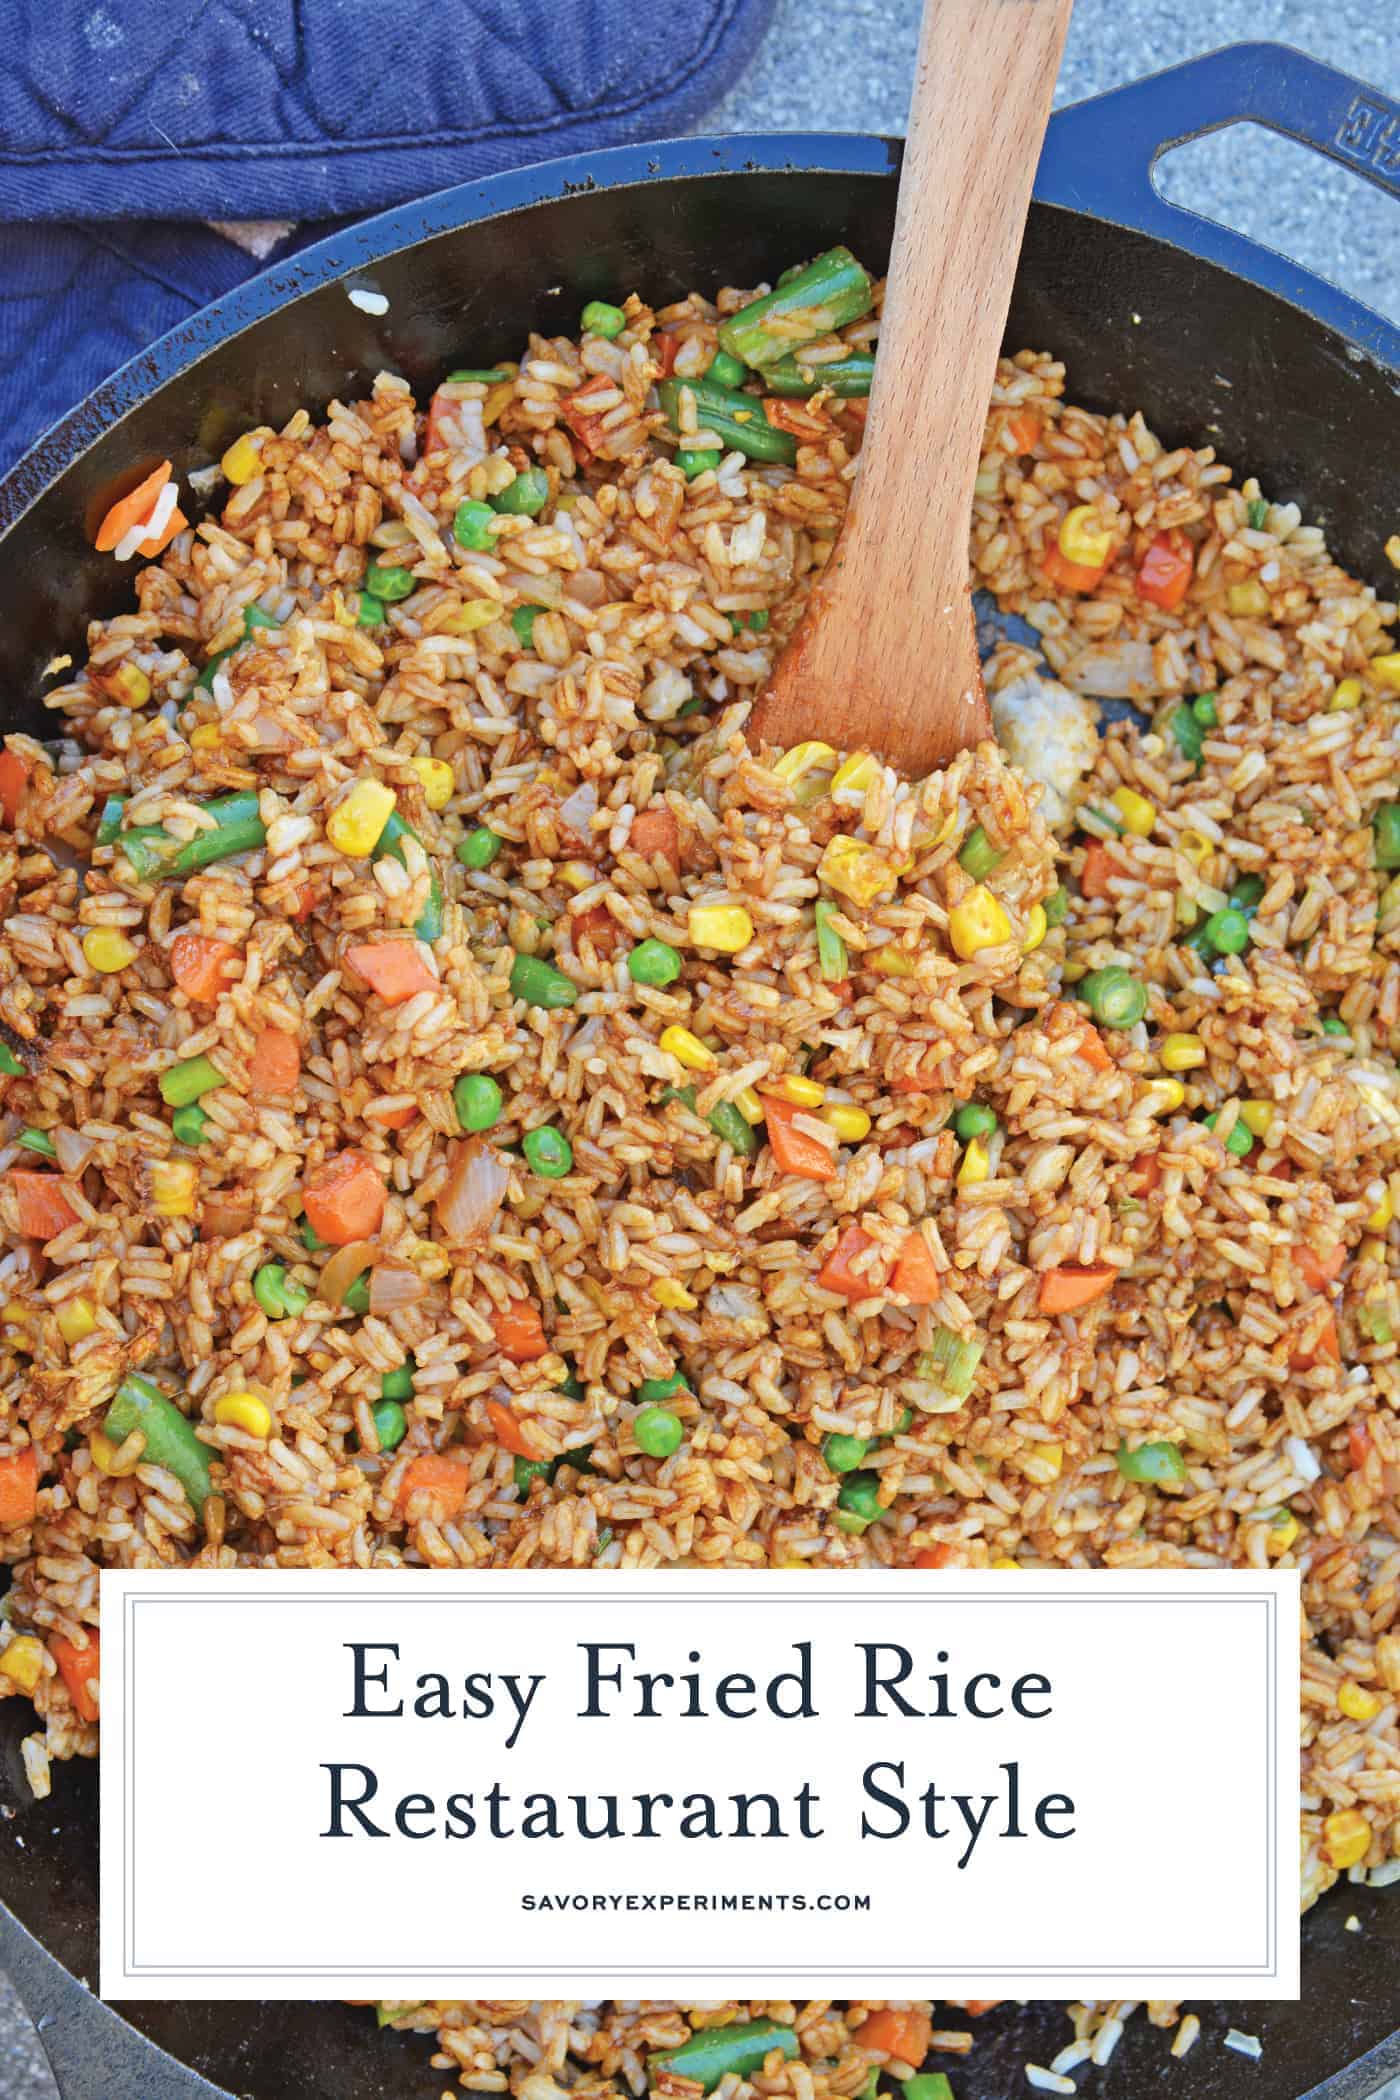 Easy Fried Rice + Video - Restaurant Style Fried Rice in Minutes!